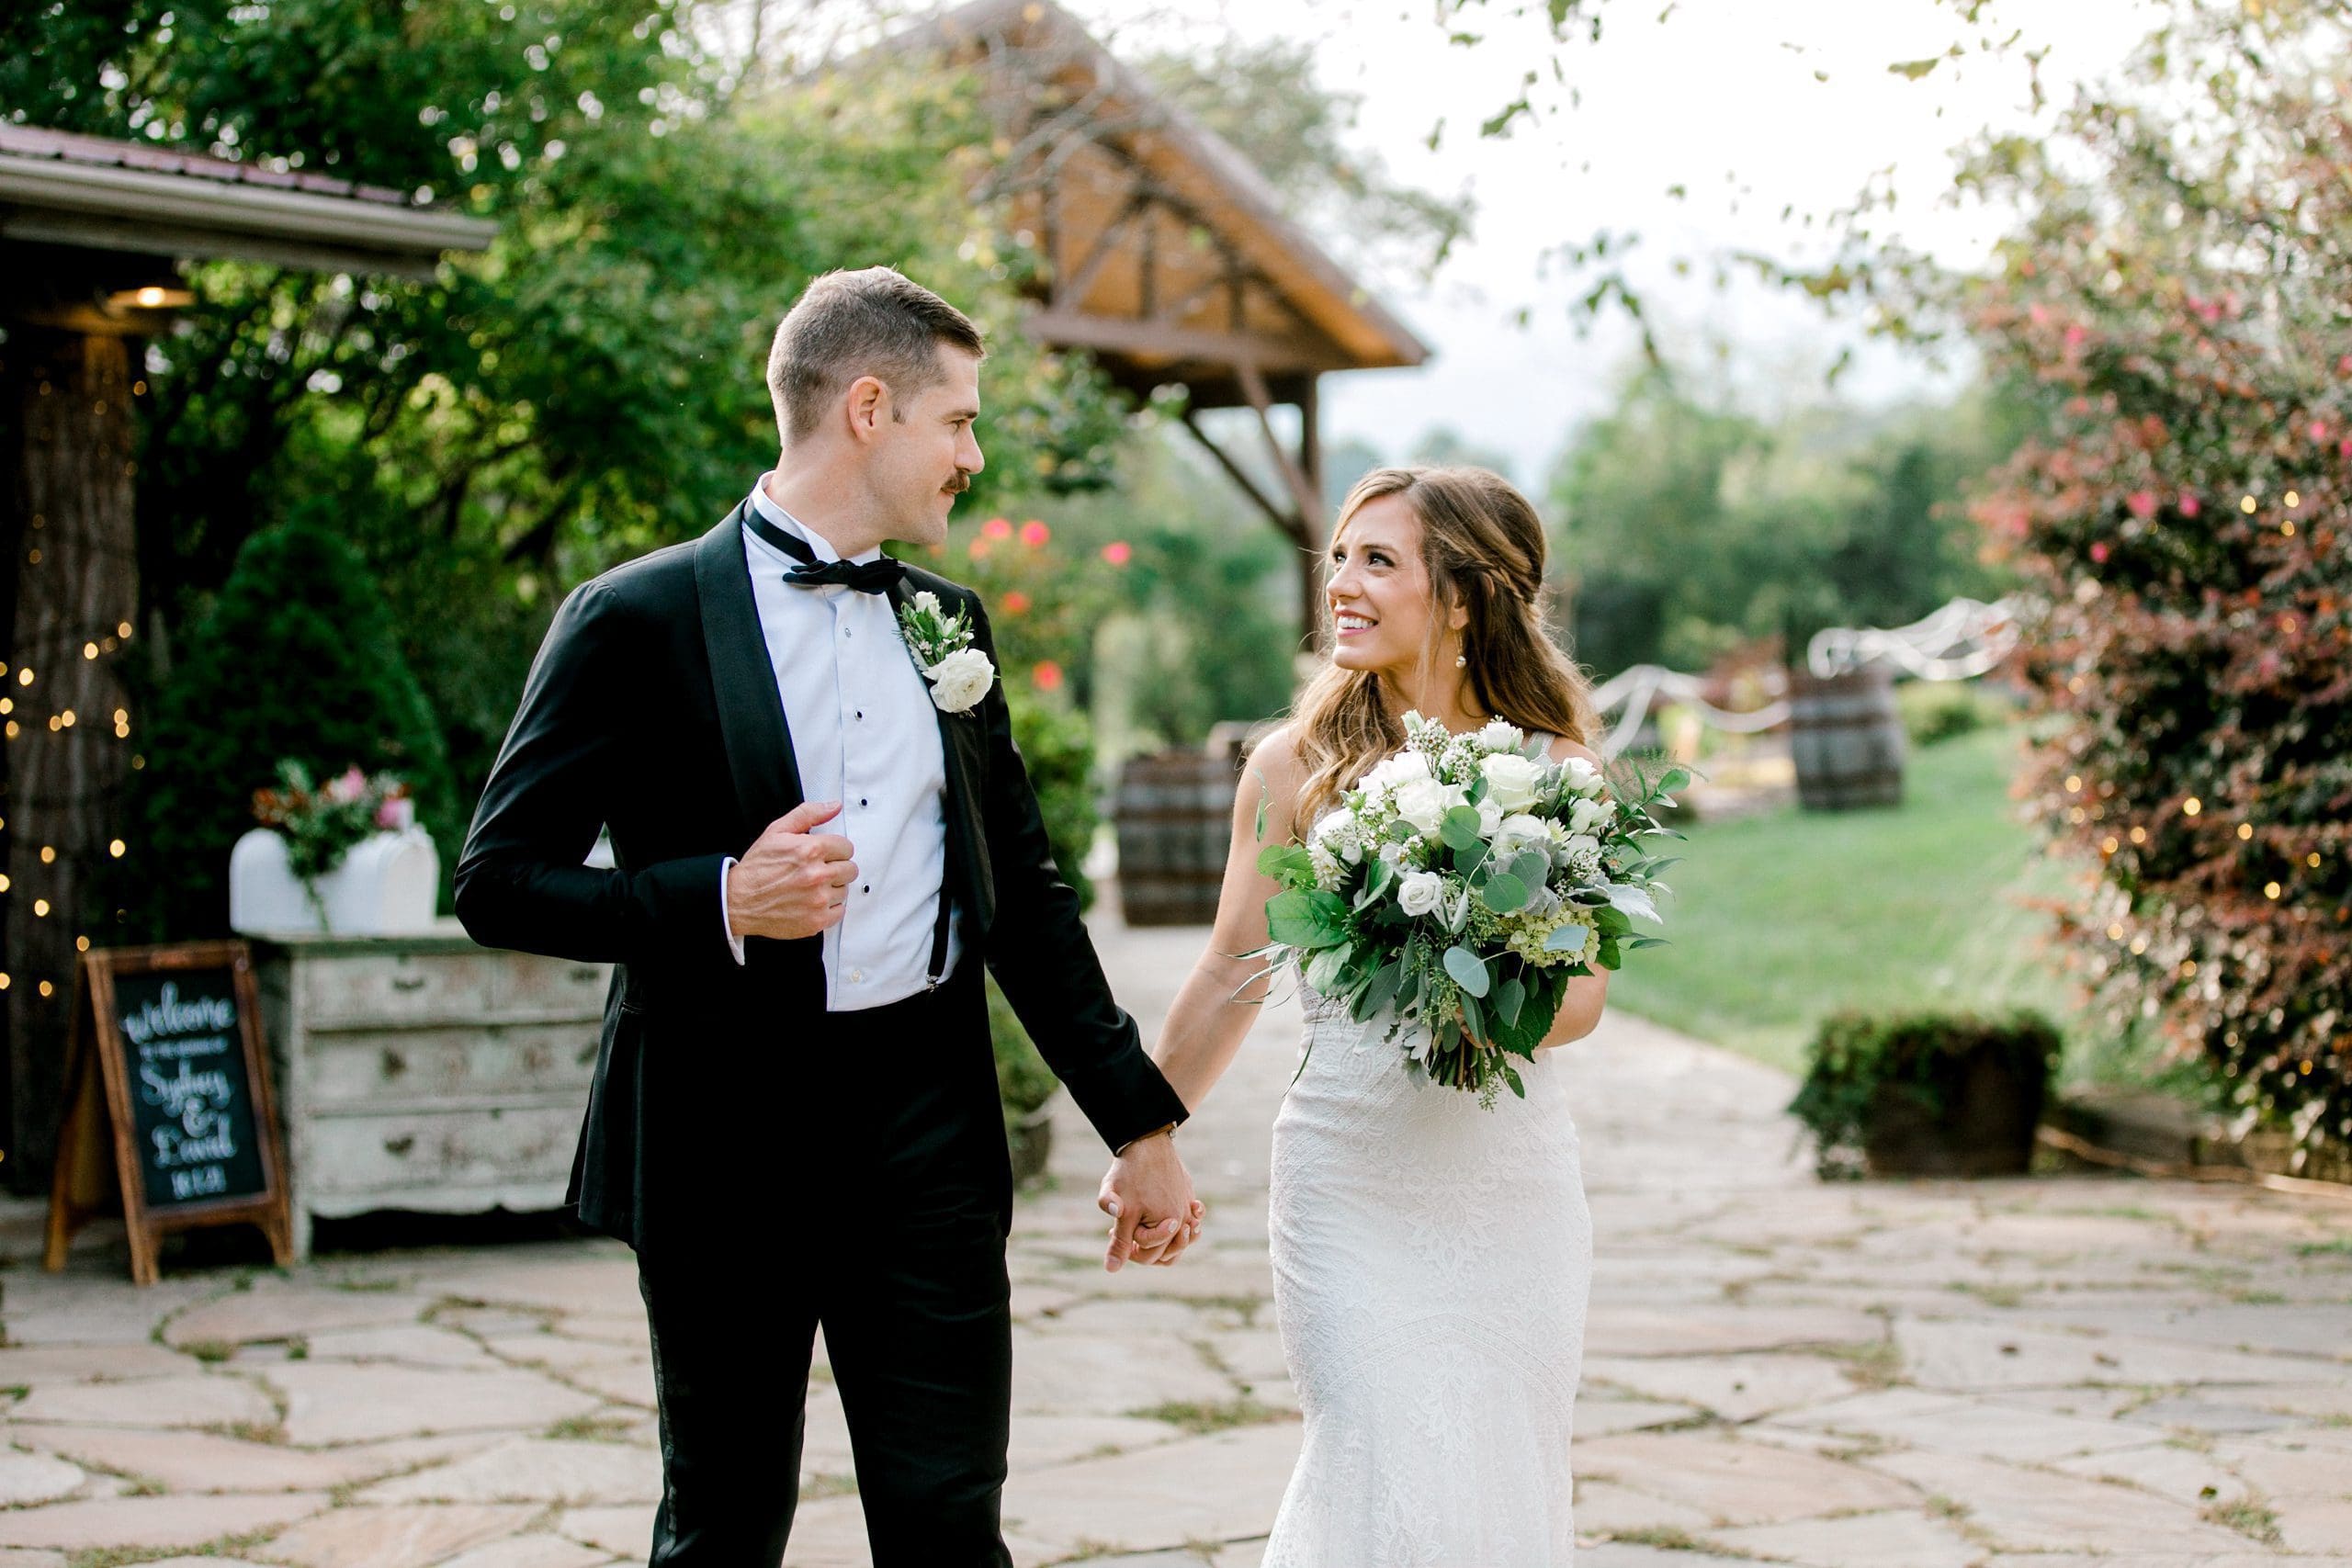 Bride and groom portraits at the Farm | Kathy Beaver Photography | Asheville Wedding Photographer